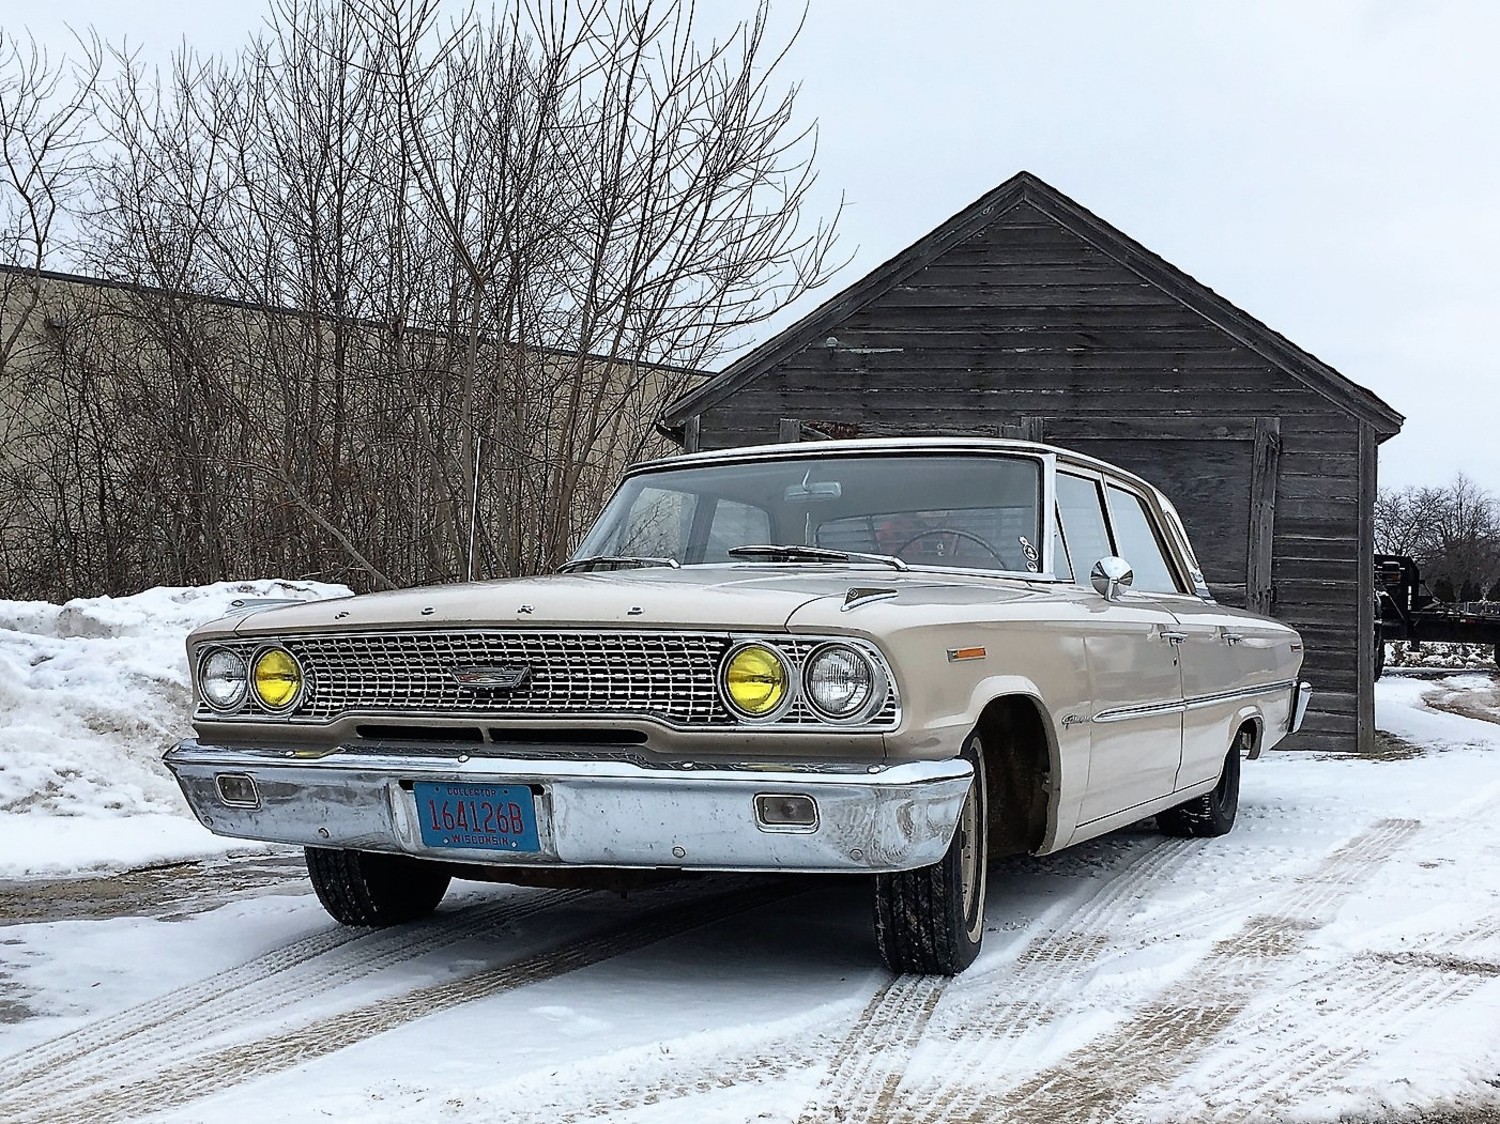 , Inaugural Polar-Rama puts hot rods on ice in Wisconsin, ClassicCars.com Journal